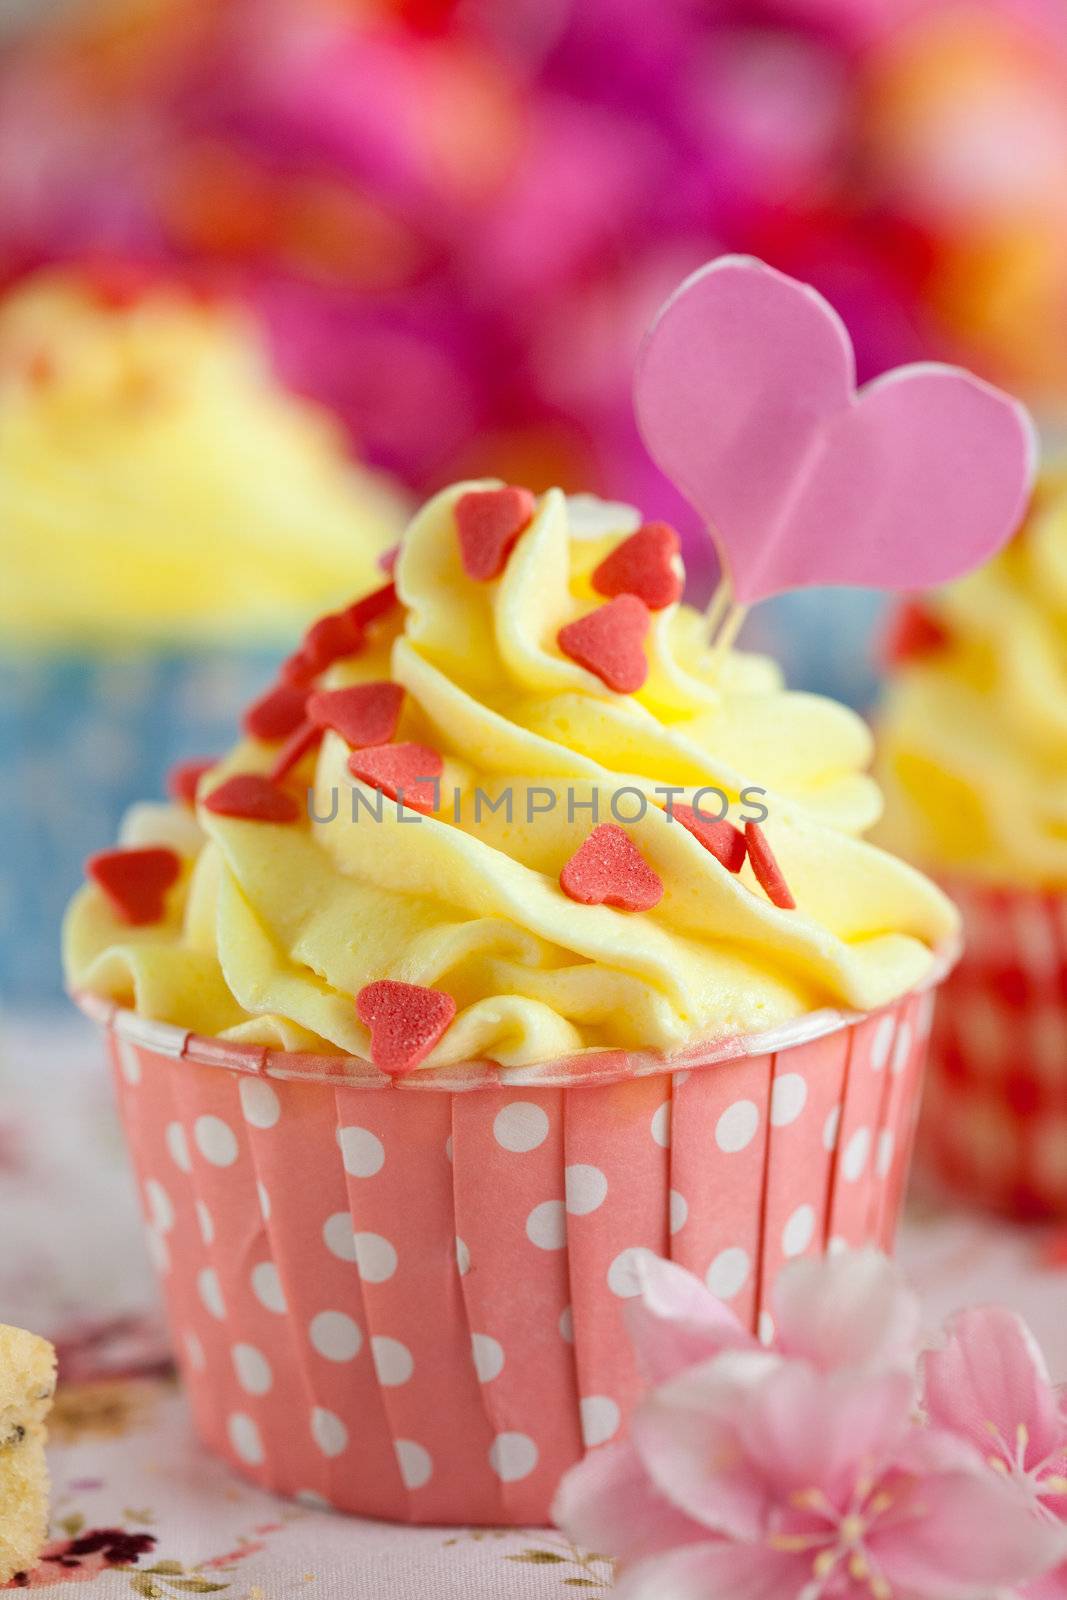 Cupcake with lemon buttercream dressed up for valentine